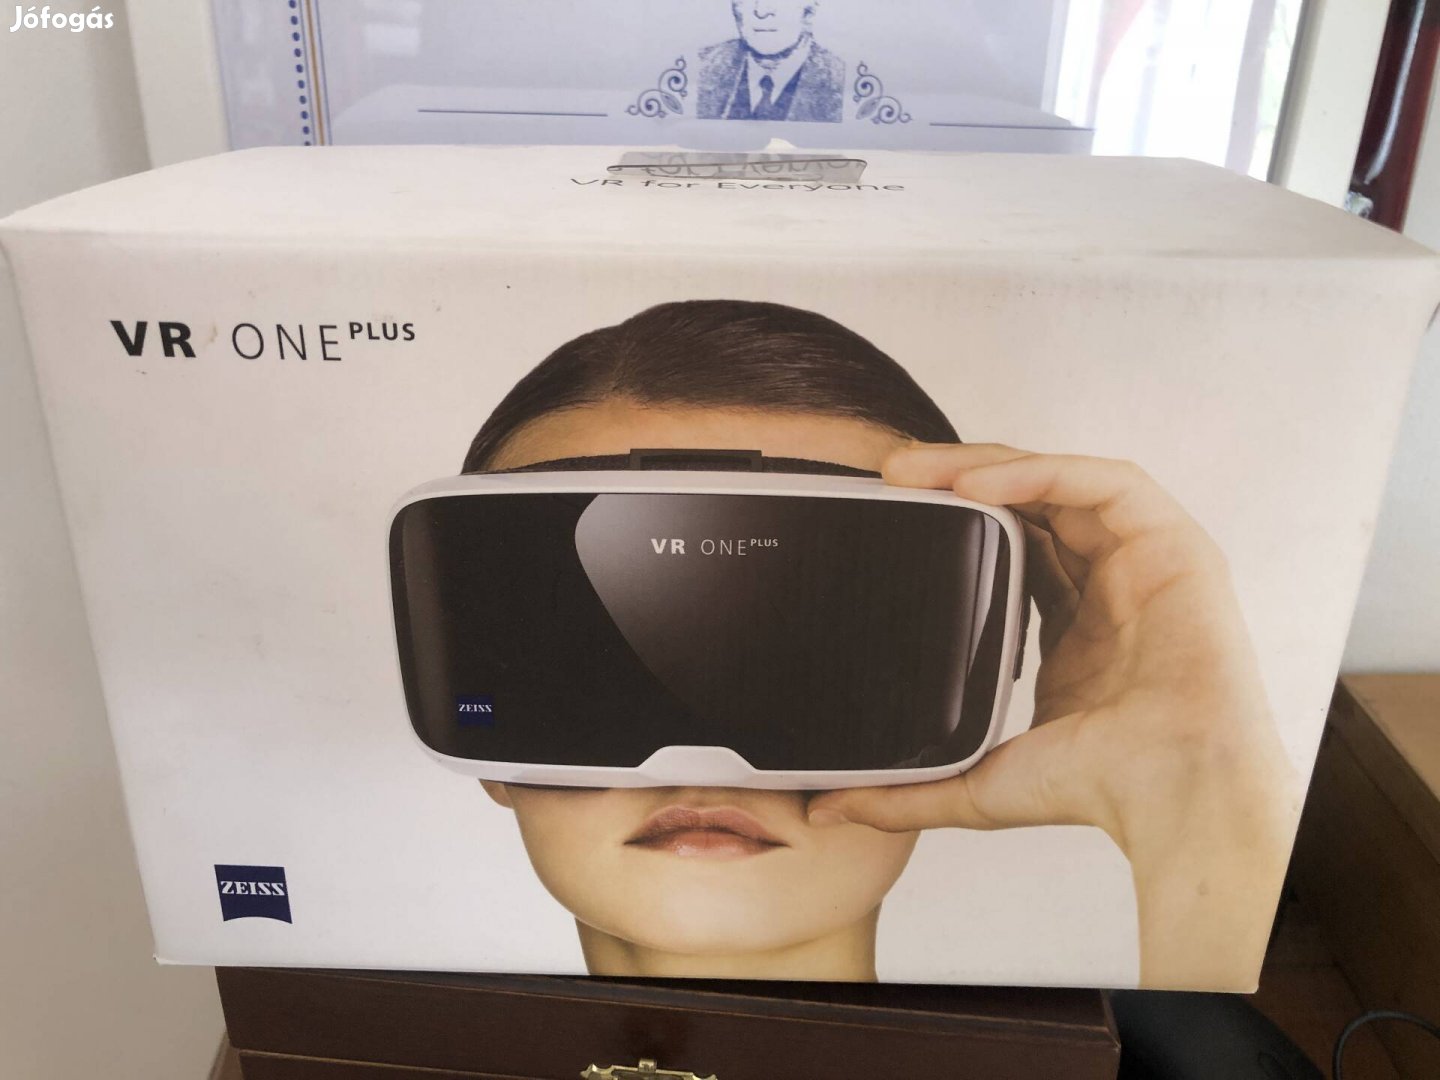 Zeiss Vr one plus